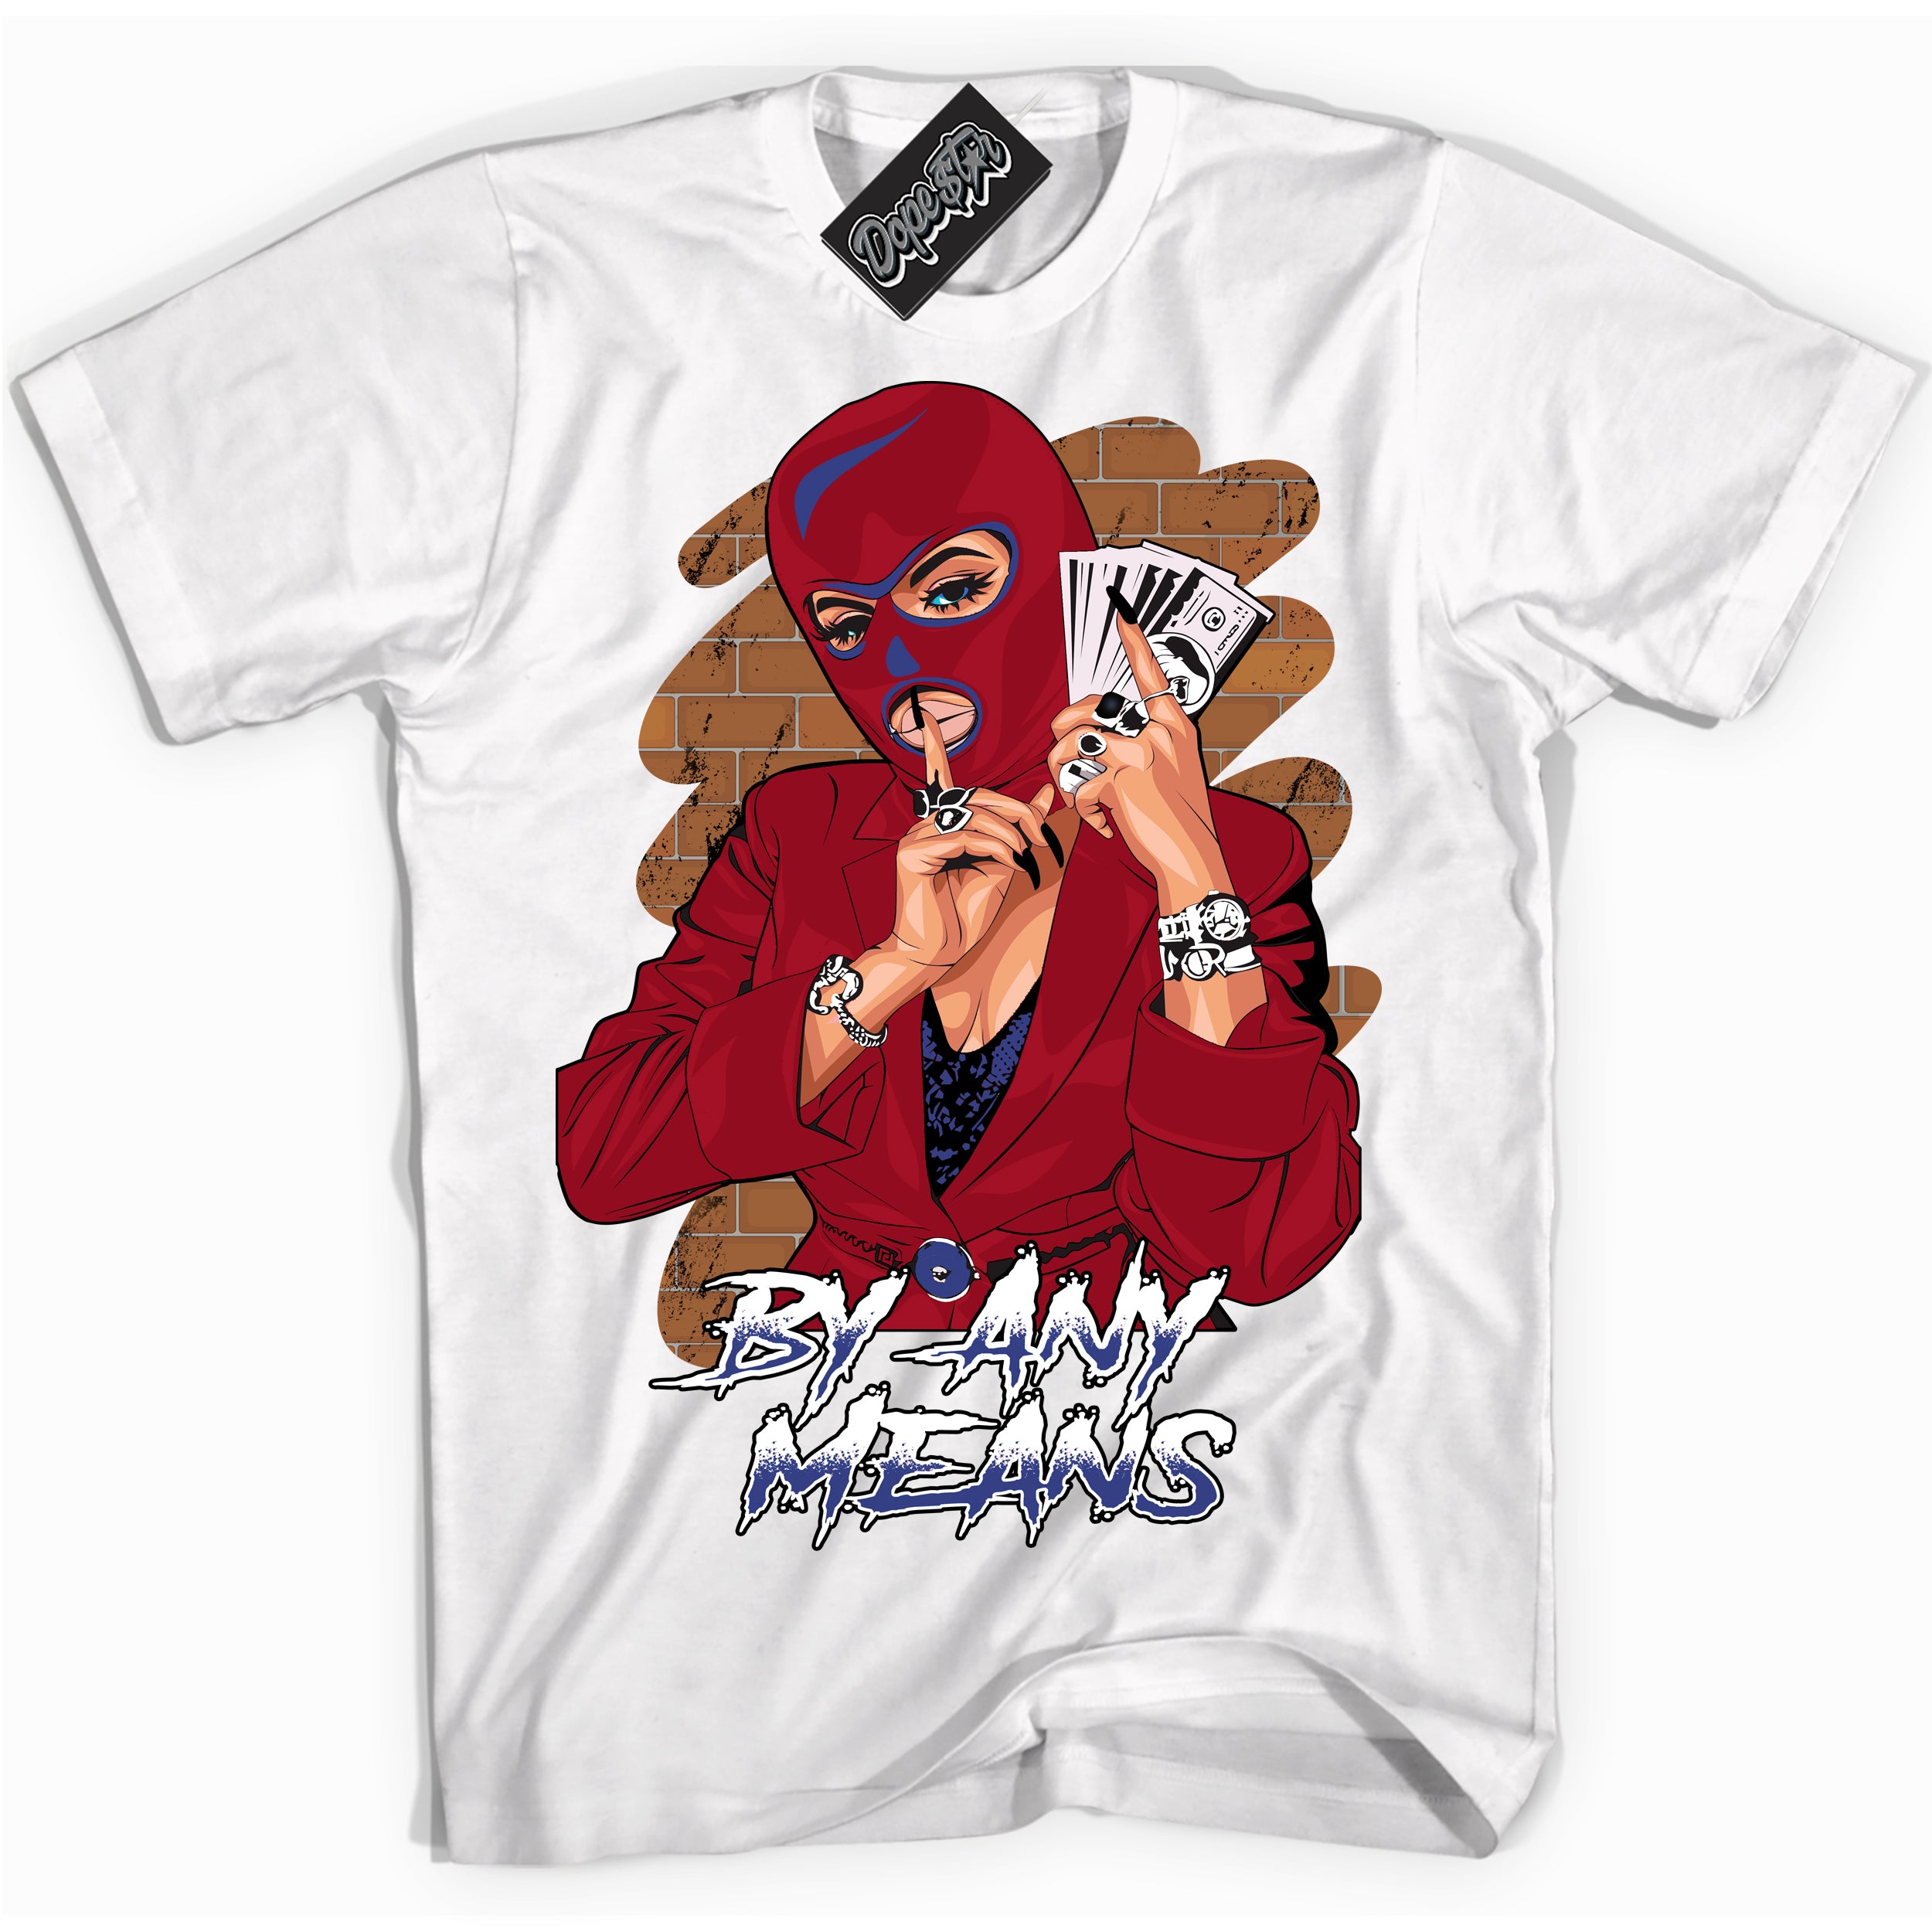 Cool White Shirt with “ By Any Means ” design that perfectly matches Playoffs 8s Sneakers.